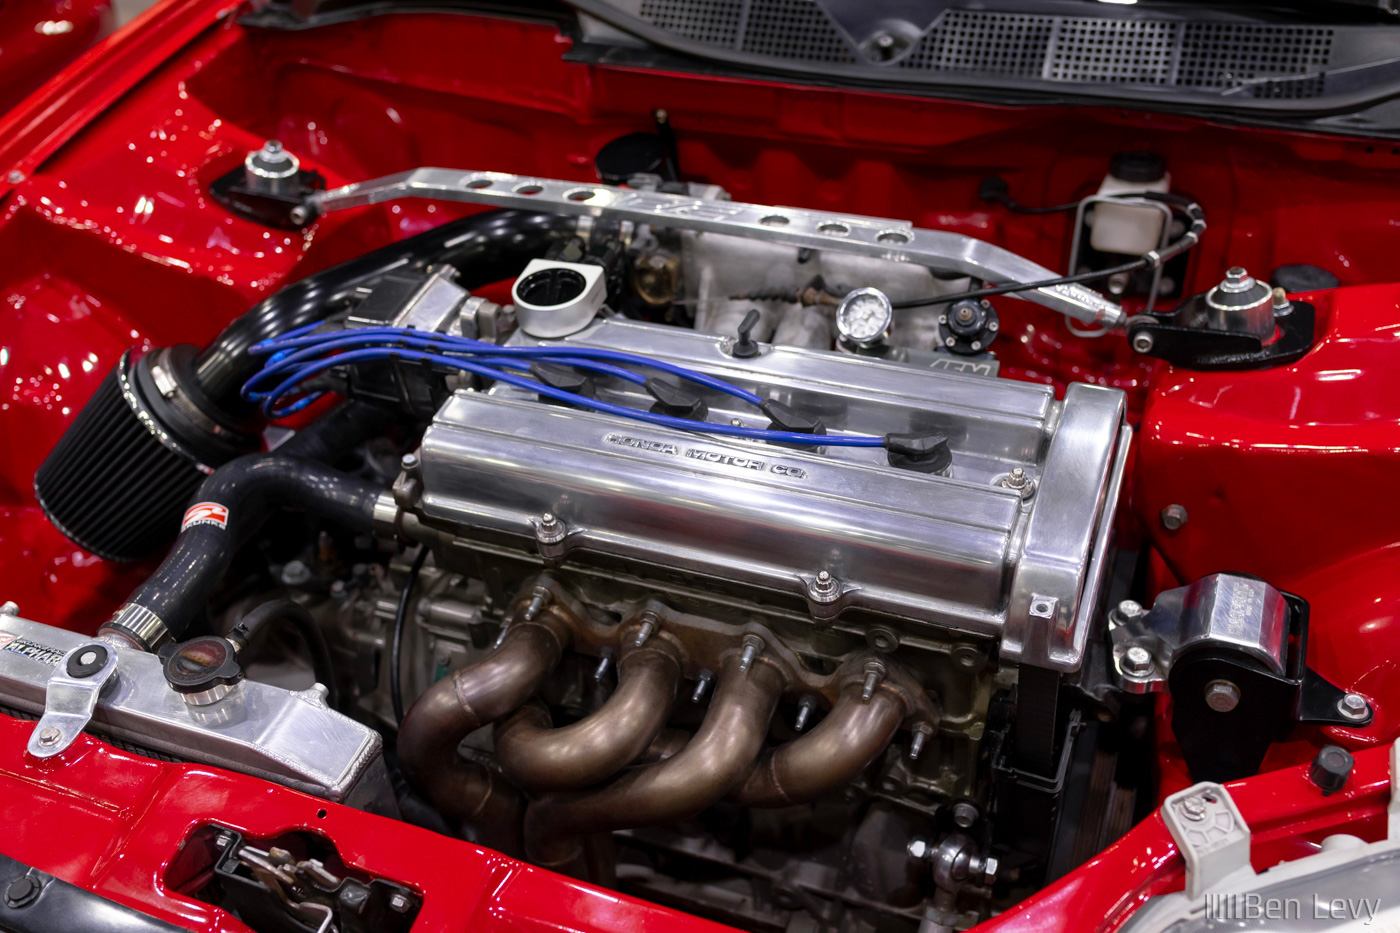 B-Series Engine with Polished Valve Cover